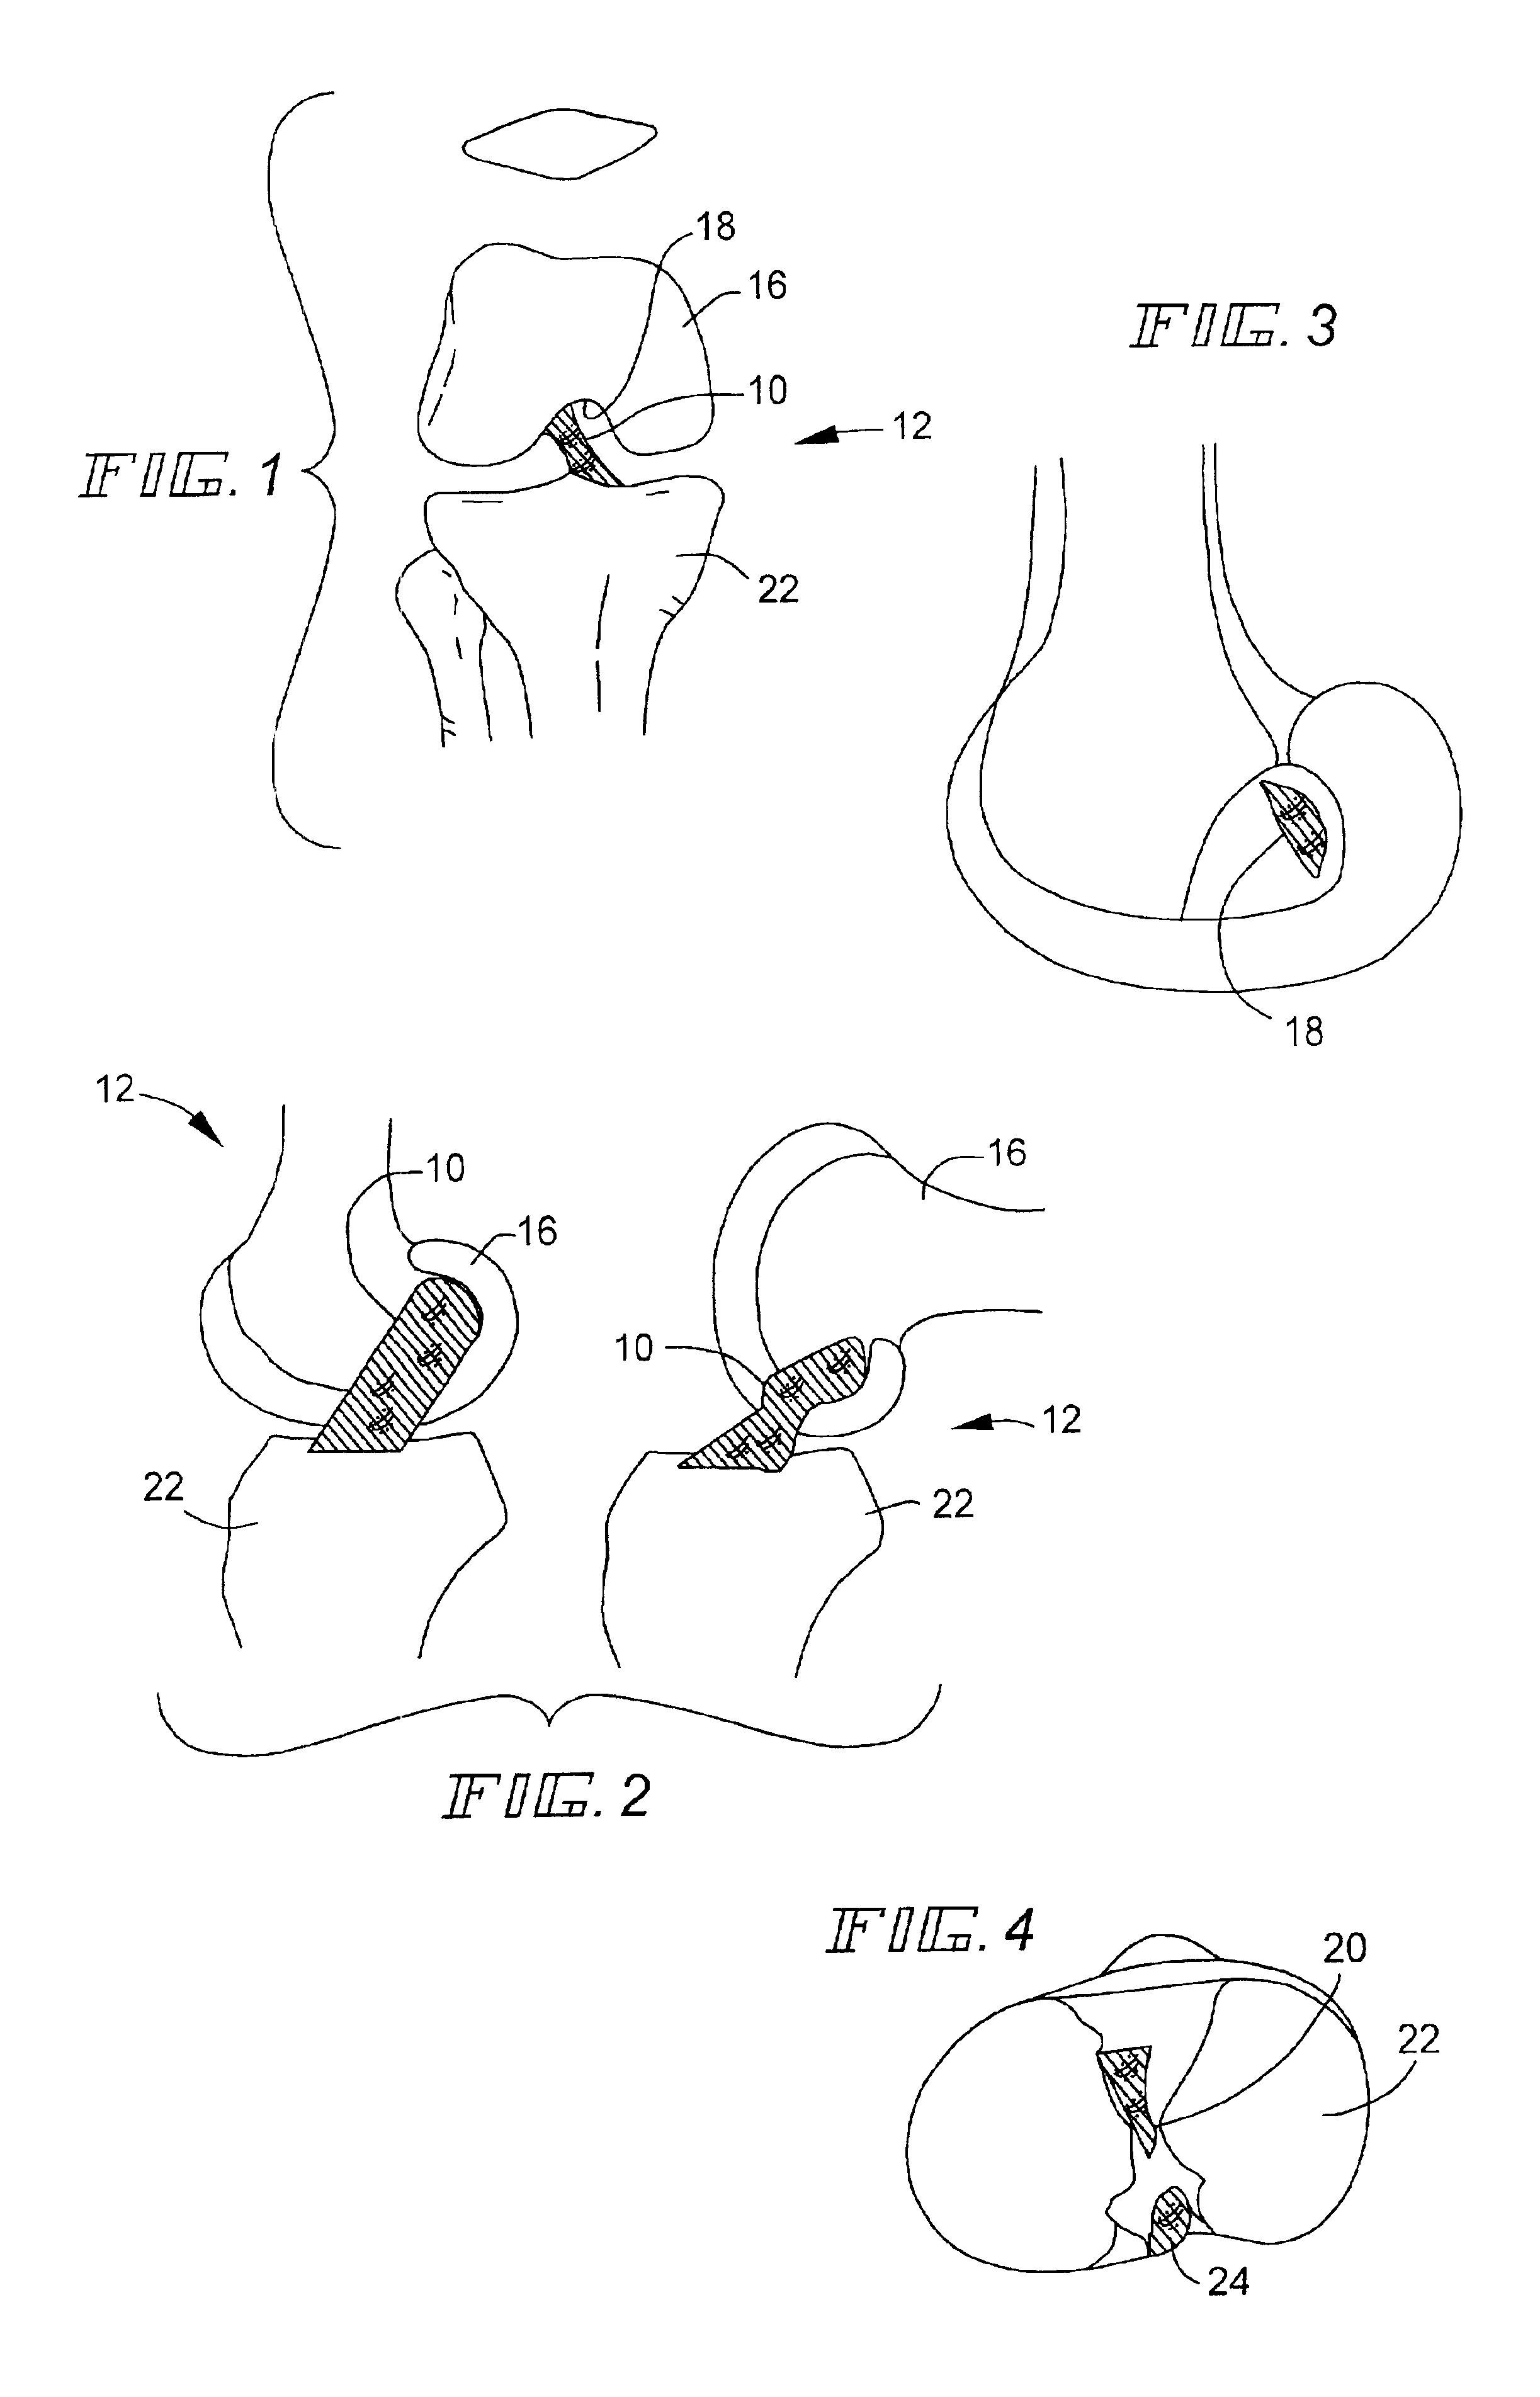 Ligament reconstruction tensioning device